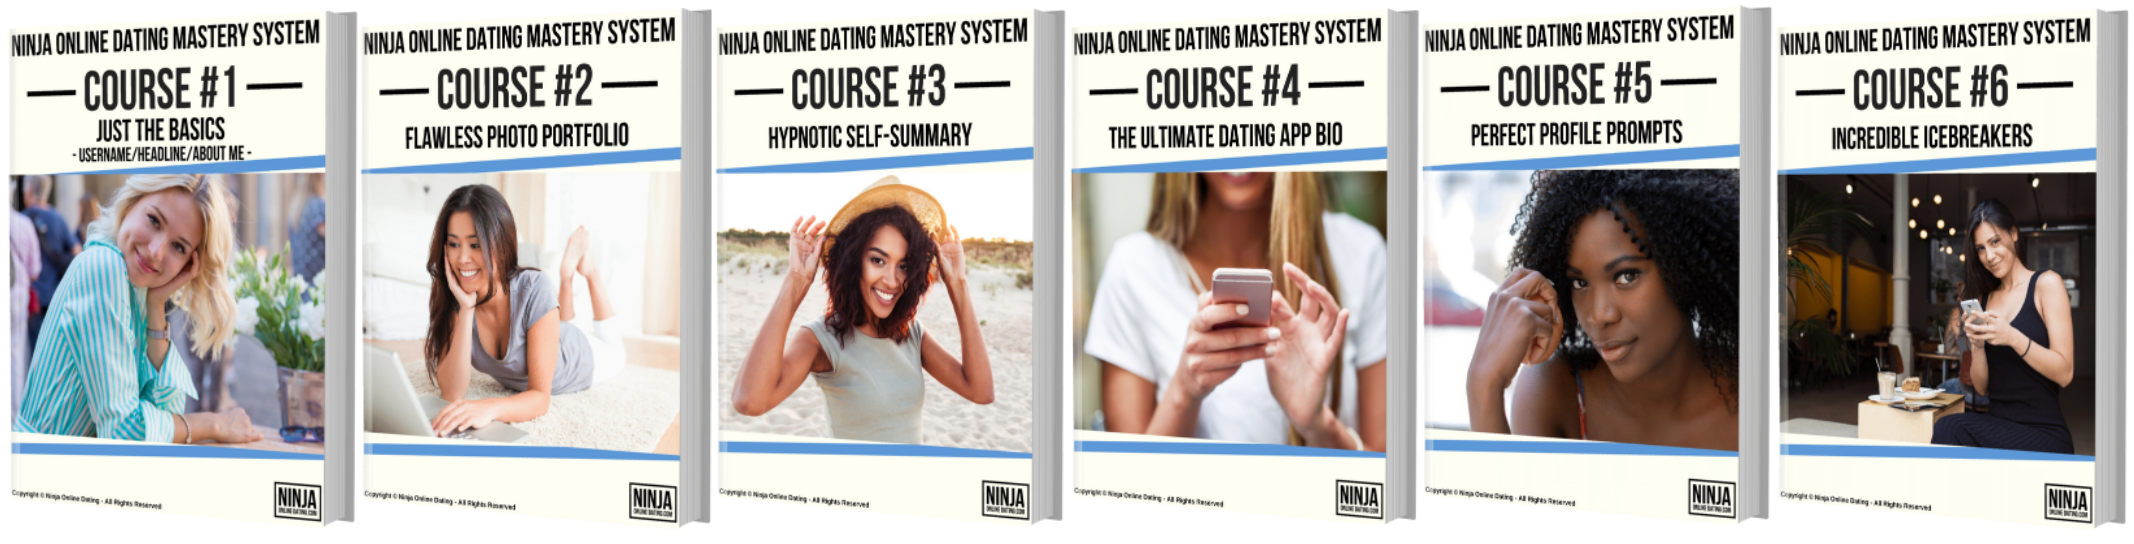 Online Dating Mastery System - Main Courses